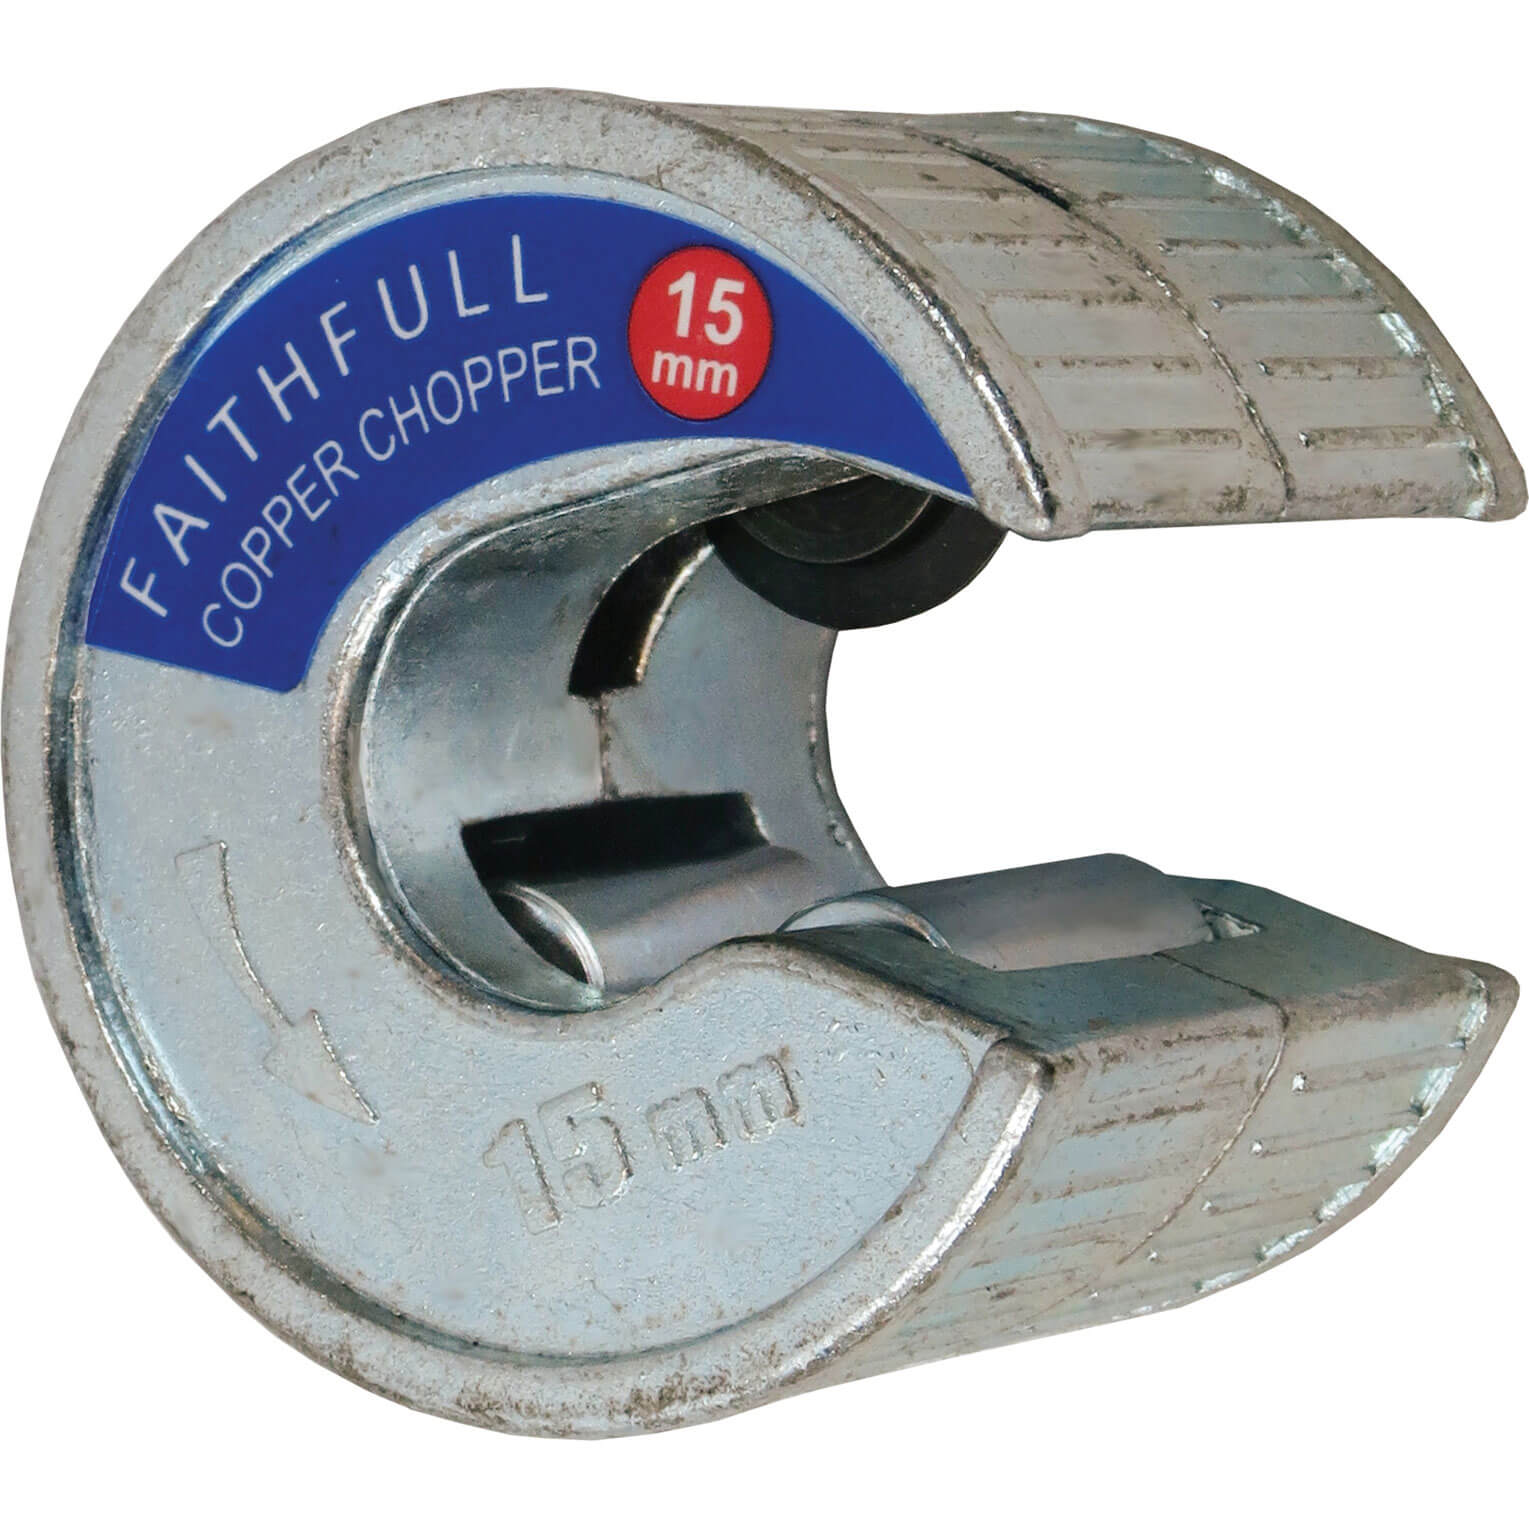 Photo of Faithfull Copper Pipe Cutter 15mm